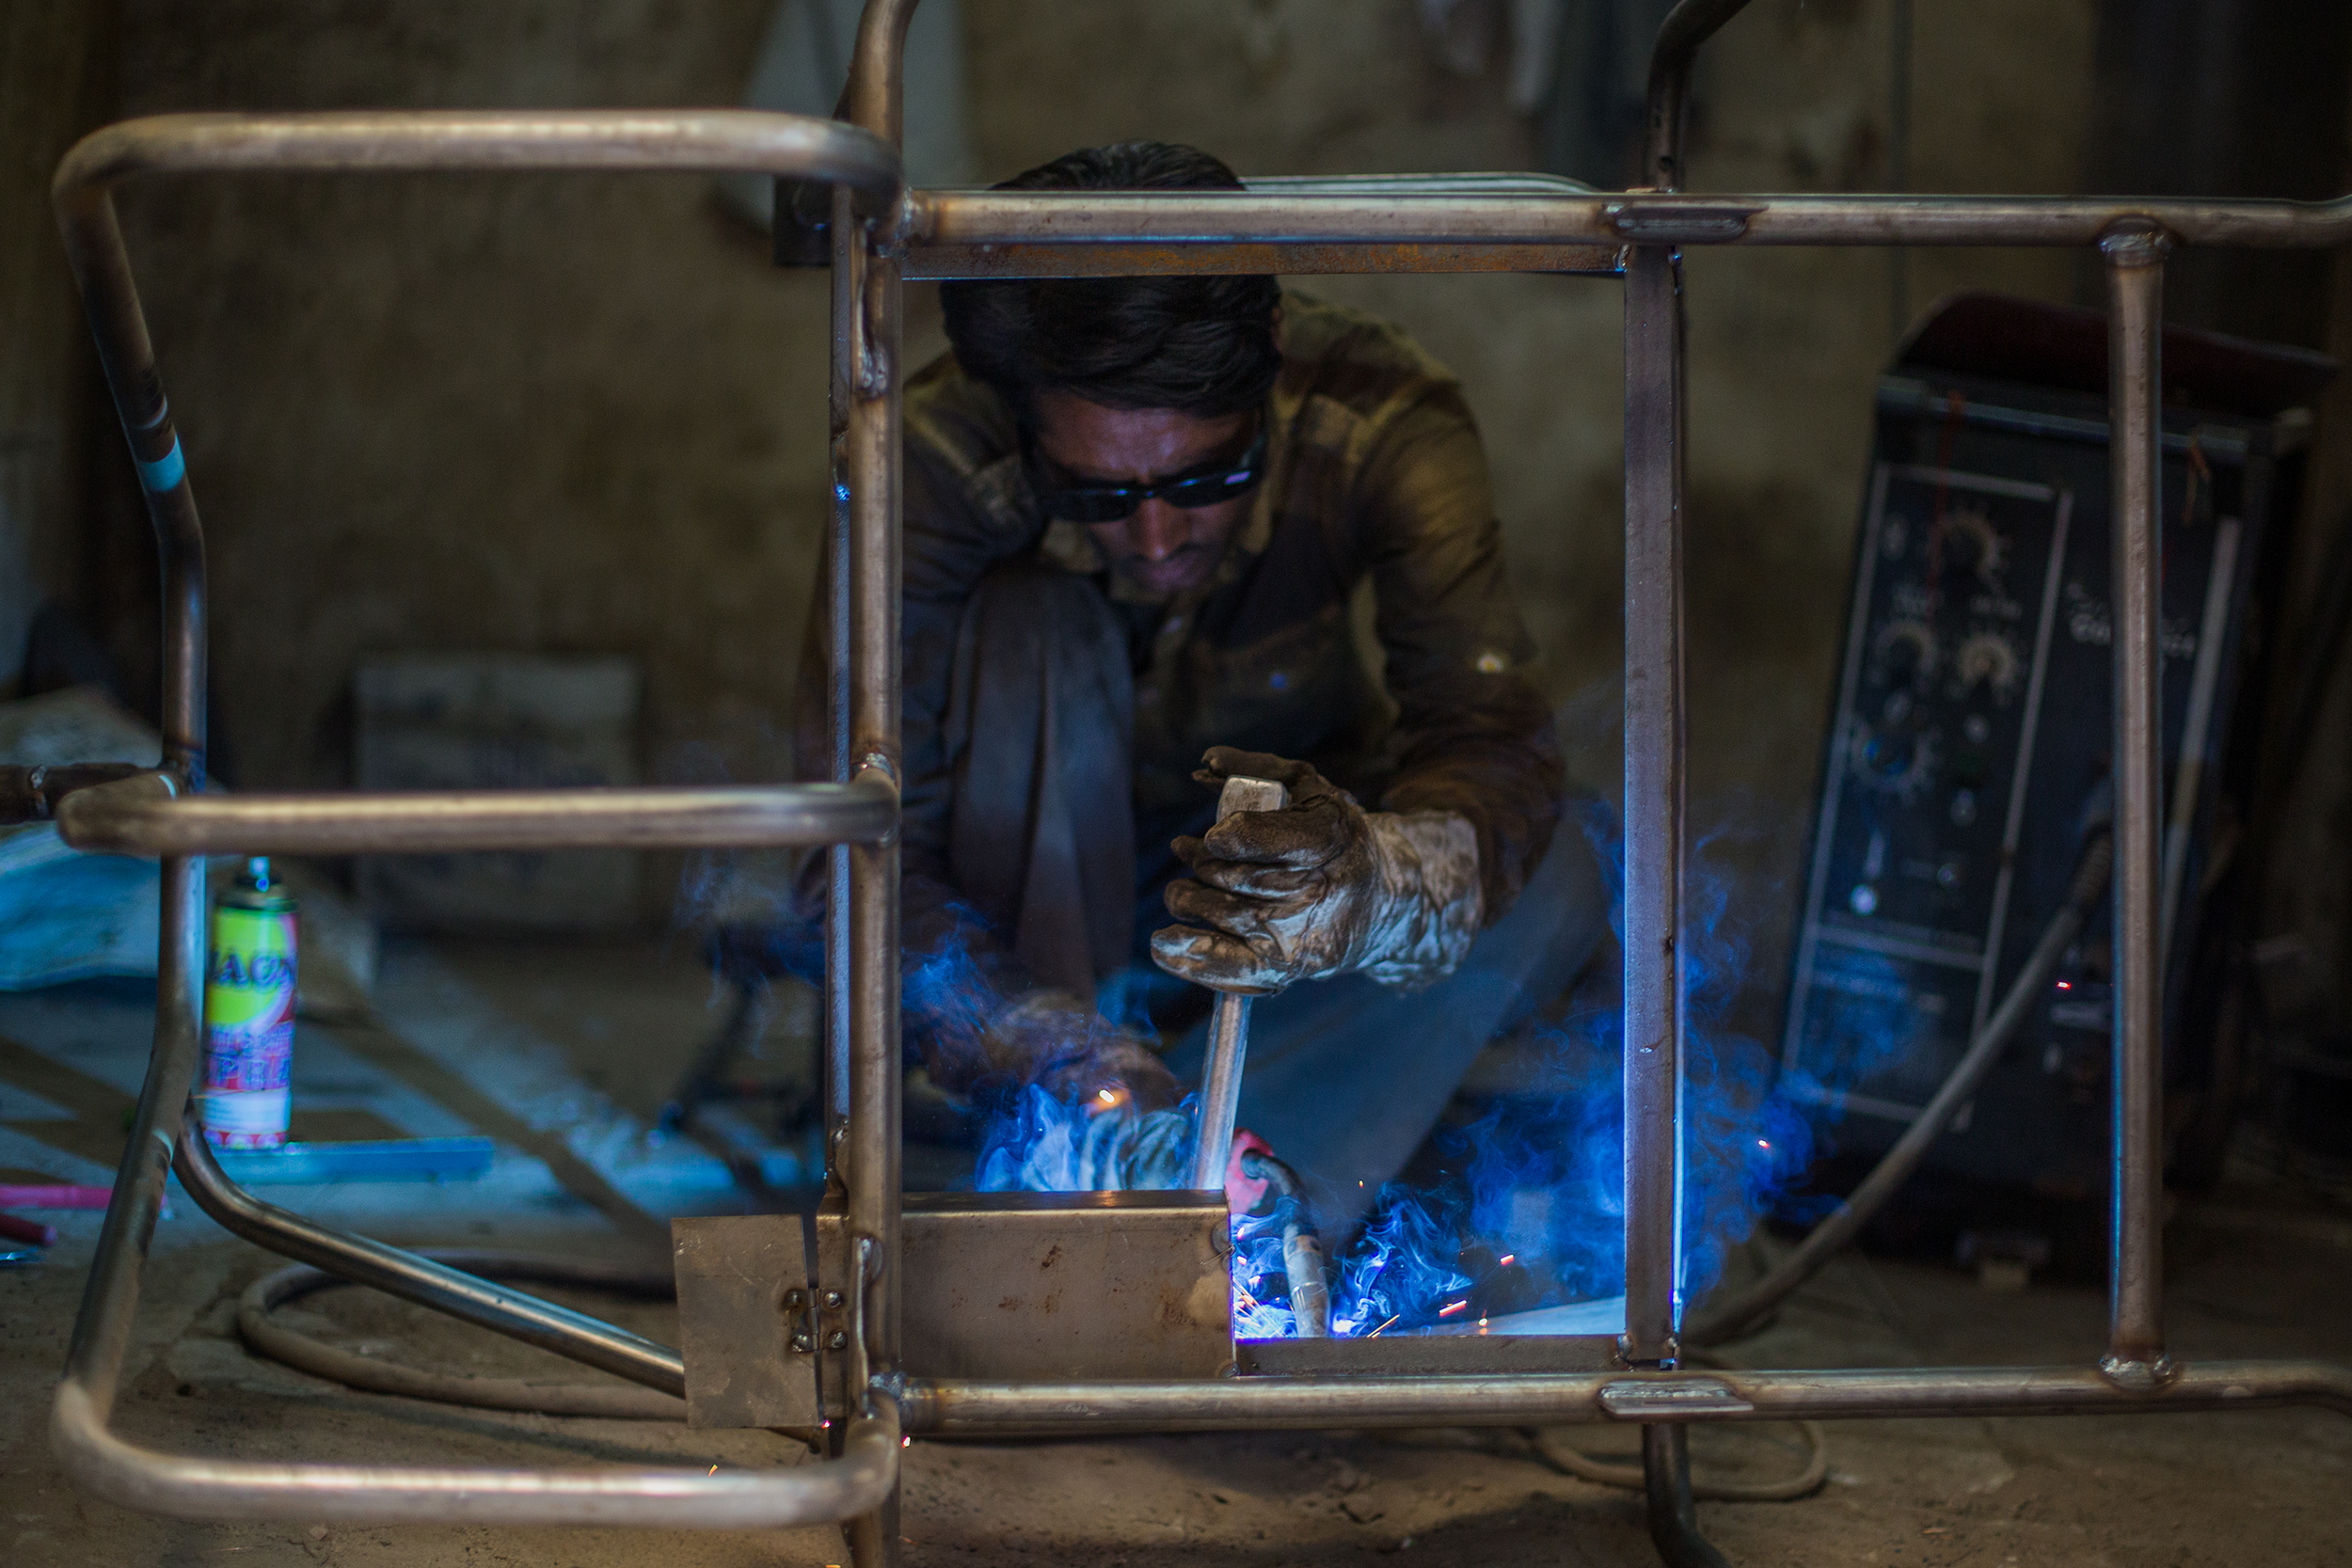  Welding a hand-pedaled tricycle frame for patients who have lost both their feet or mobility of their lower limbs. The tricycles are provided free of charge and enable patients to independently move around and increase their autonomy. 